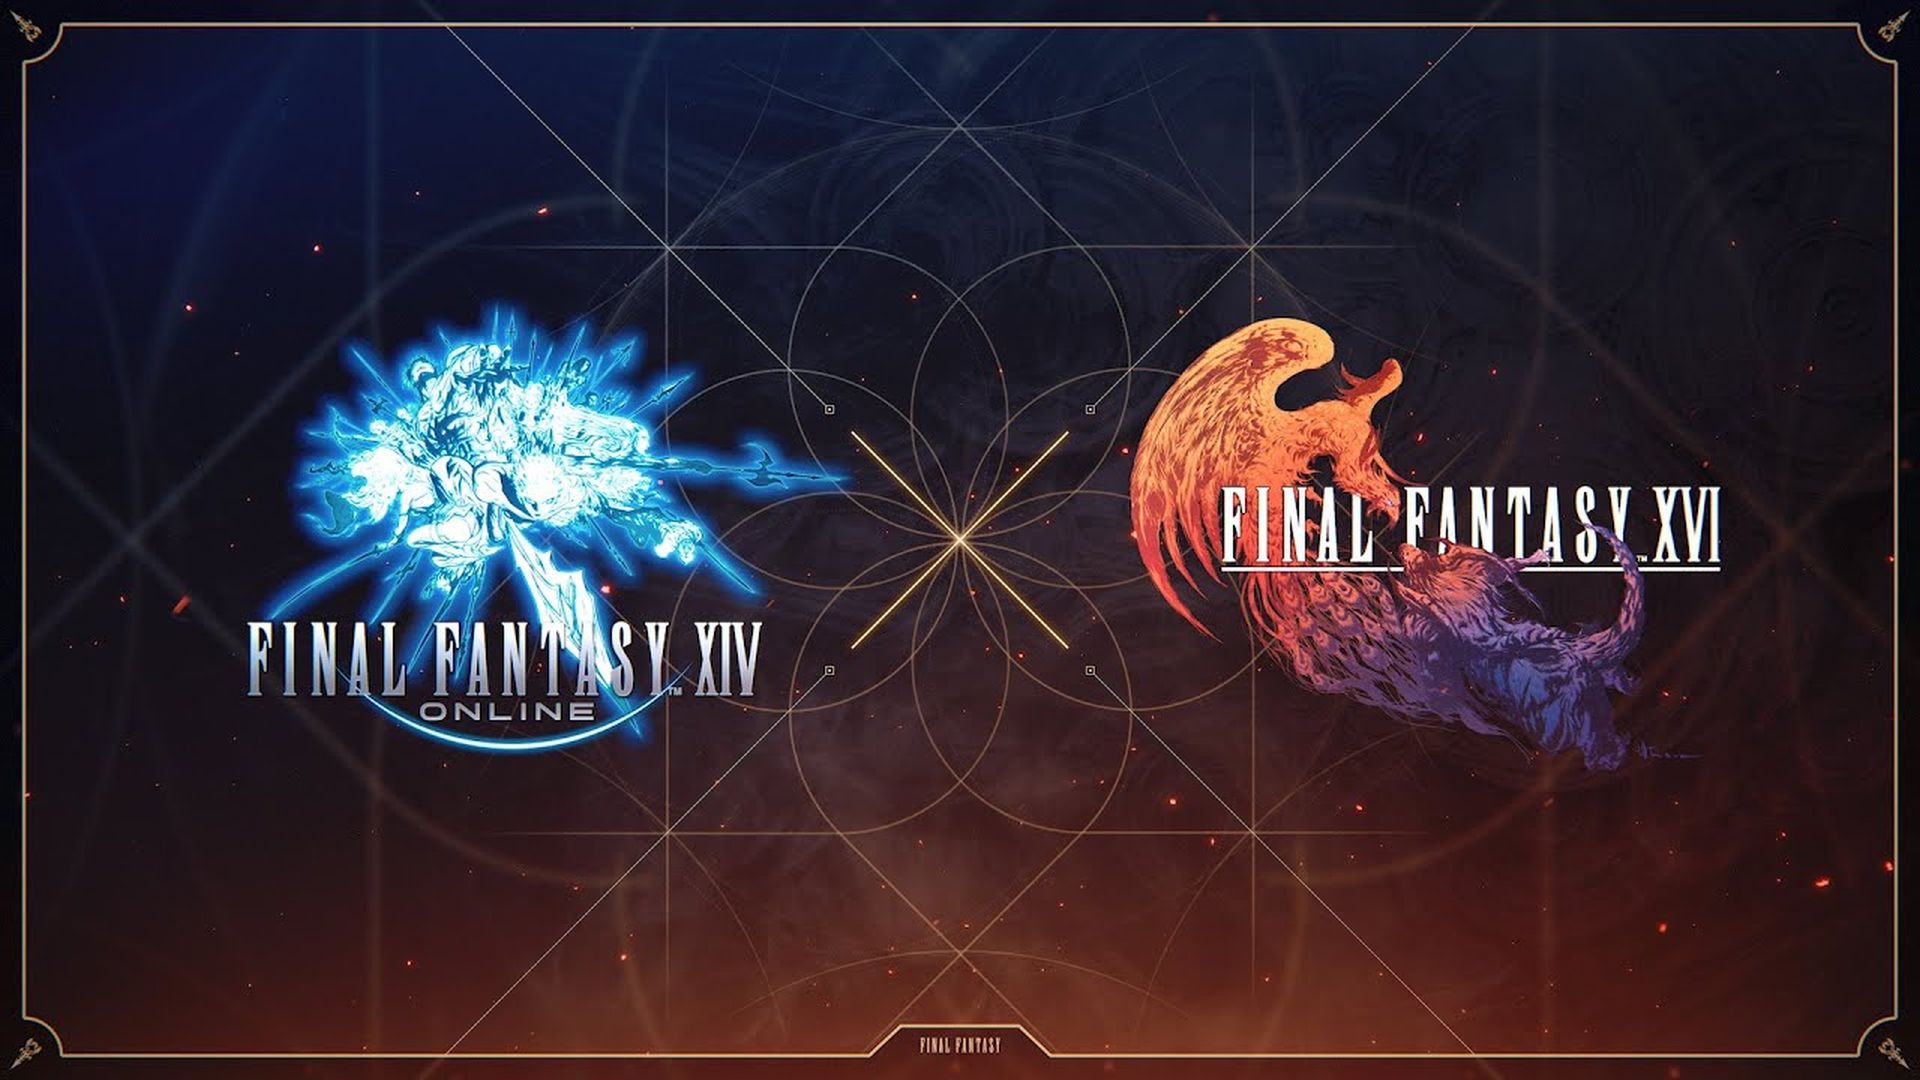 The joint crossover between Final Fantasy 14 and Final Fantasy 16 will start on April 2